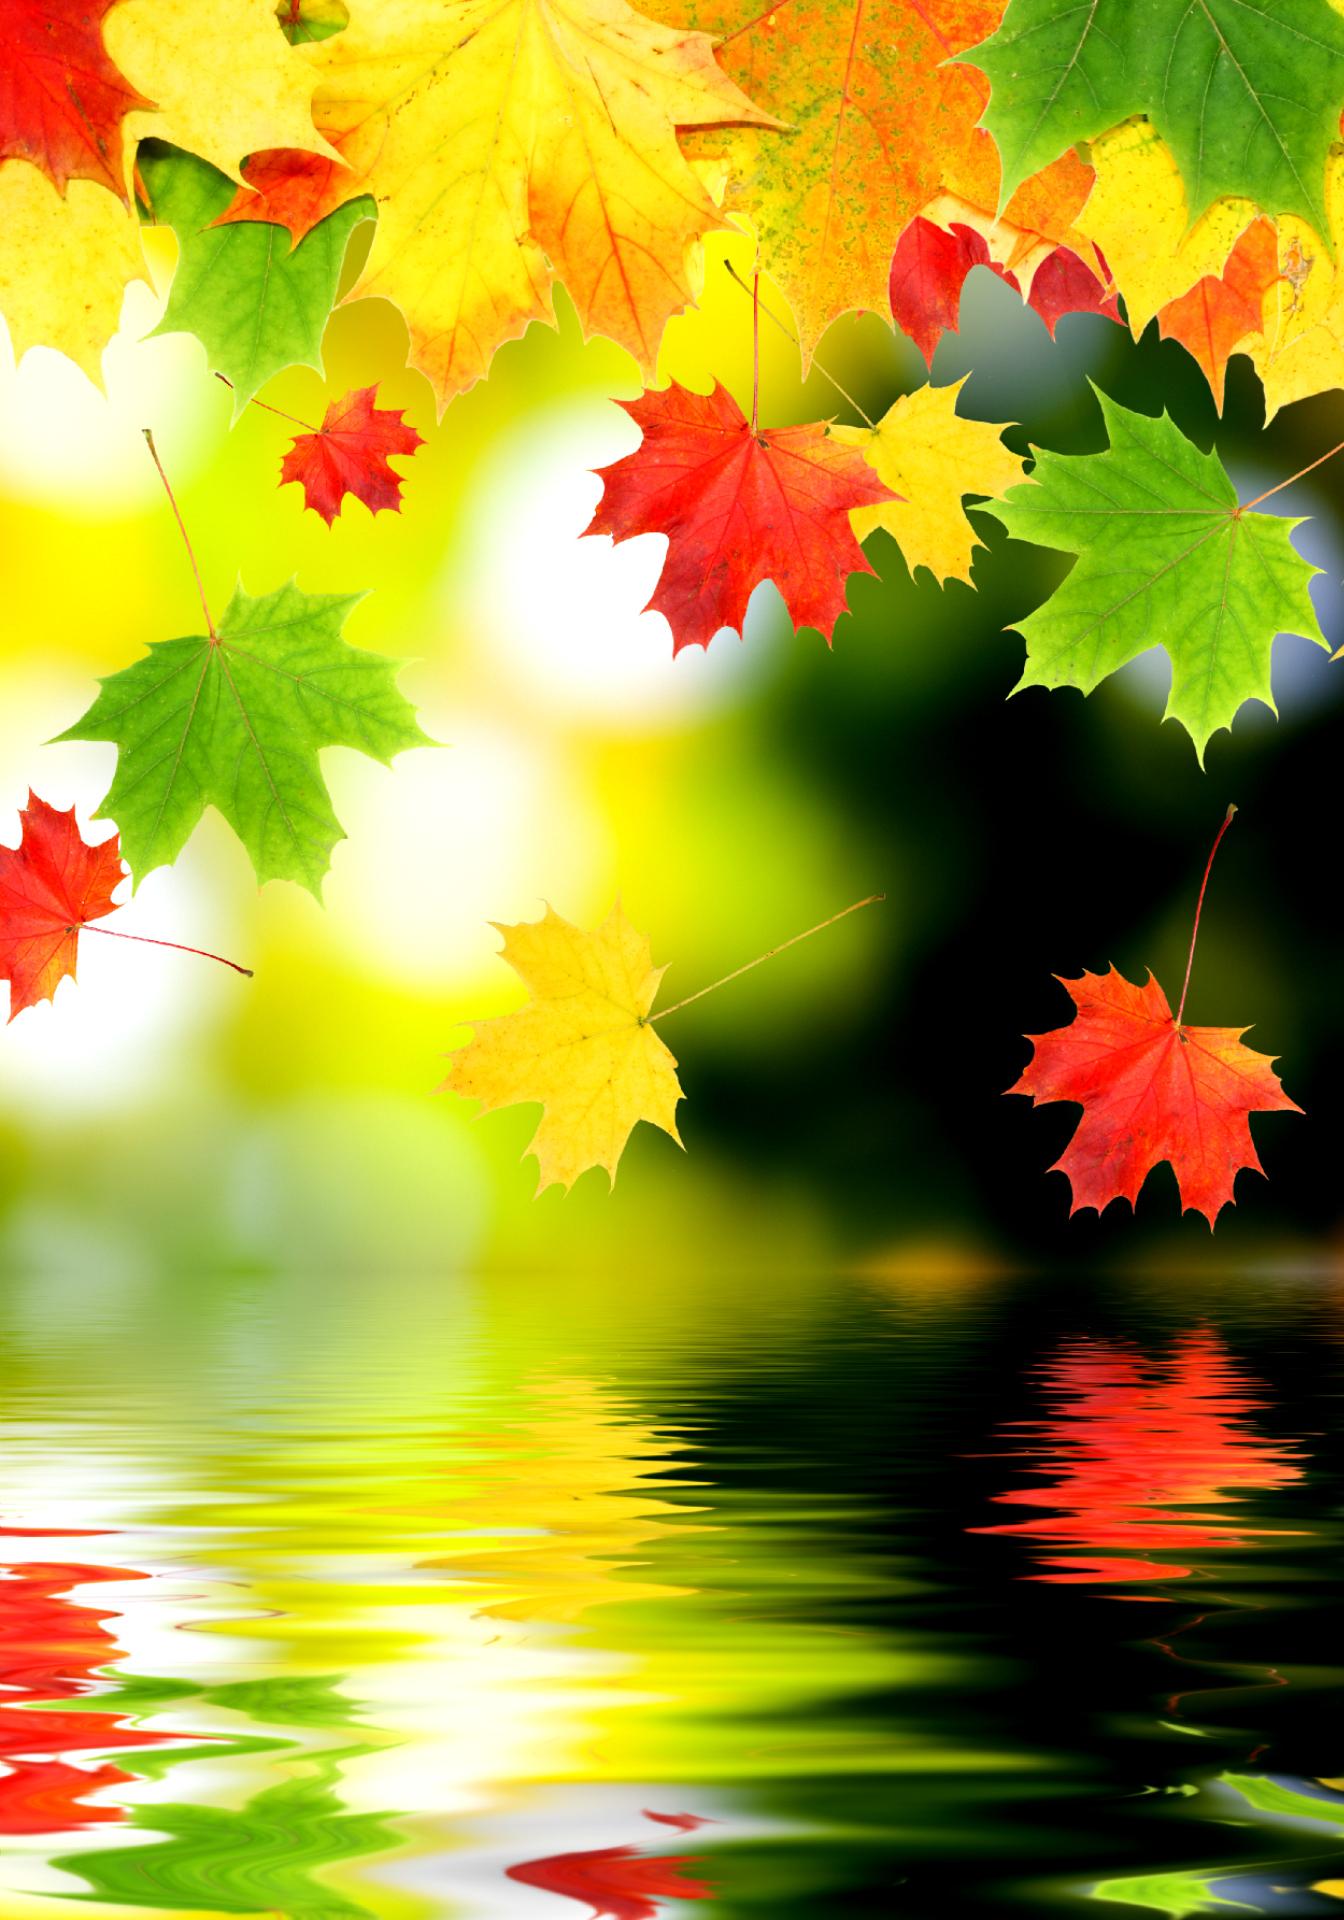 Falling Leaves Wallpaper for Android